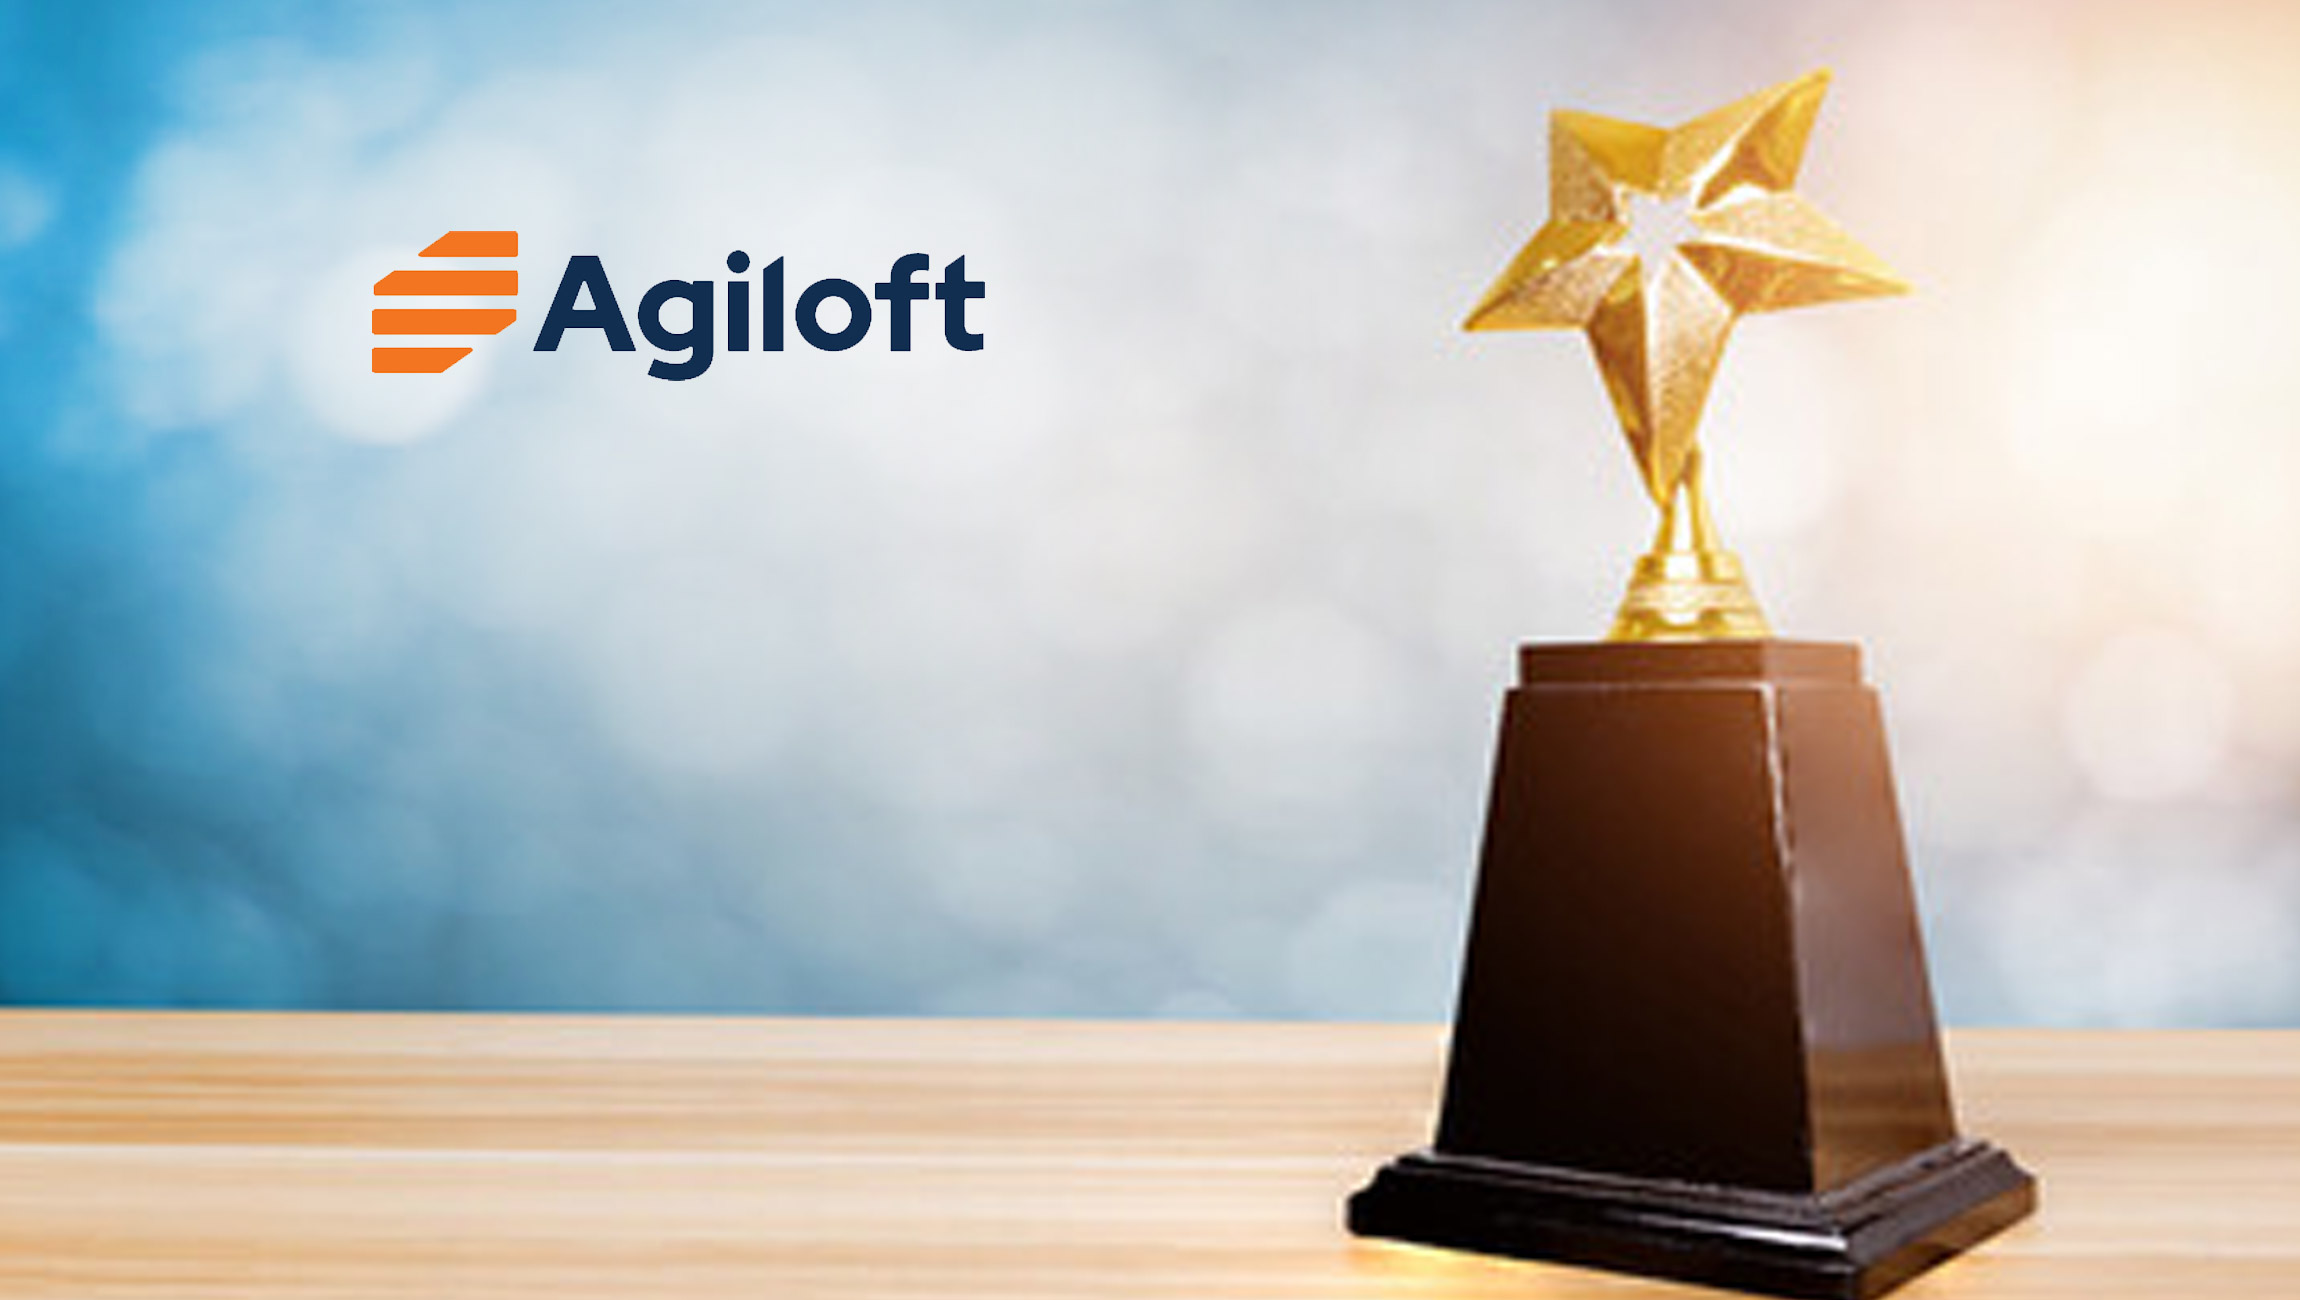 Agiloft CEO Eric Laughlin Named Executive of the Year by the BIG Awards for Business 2022